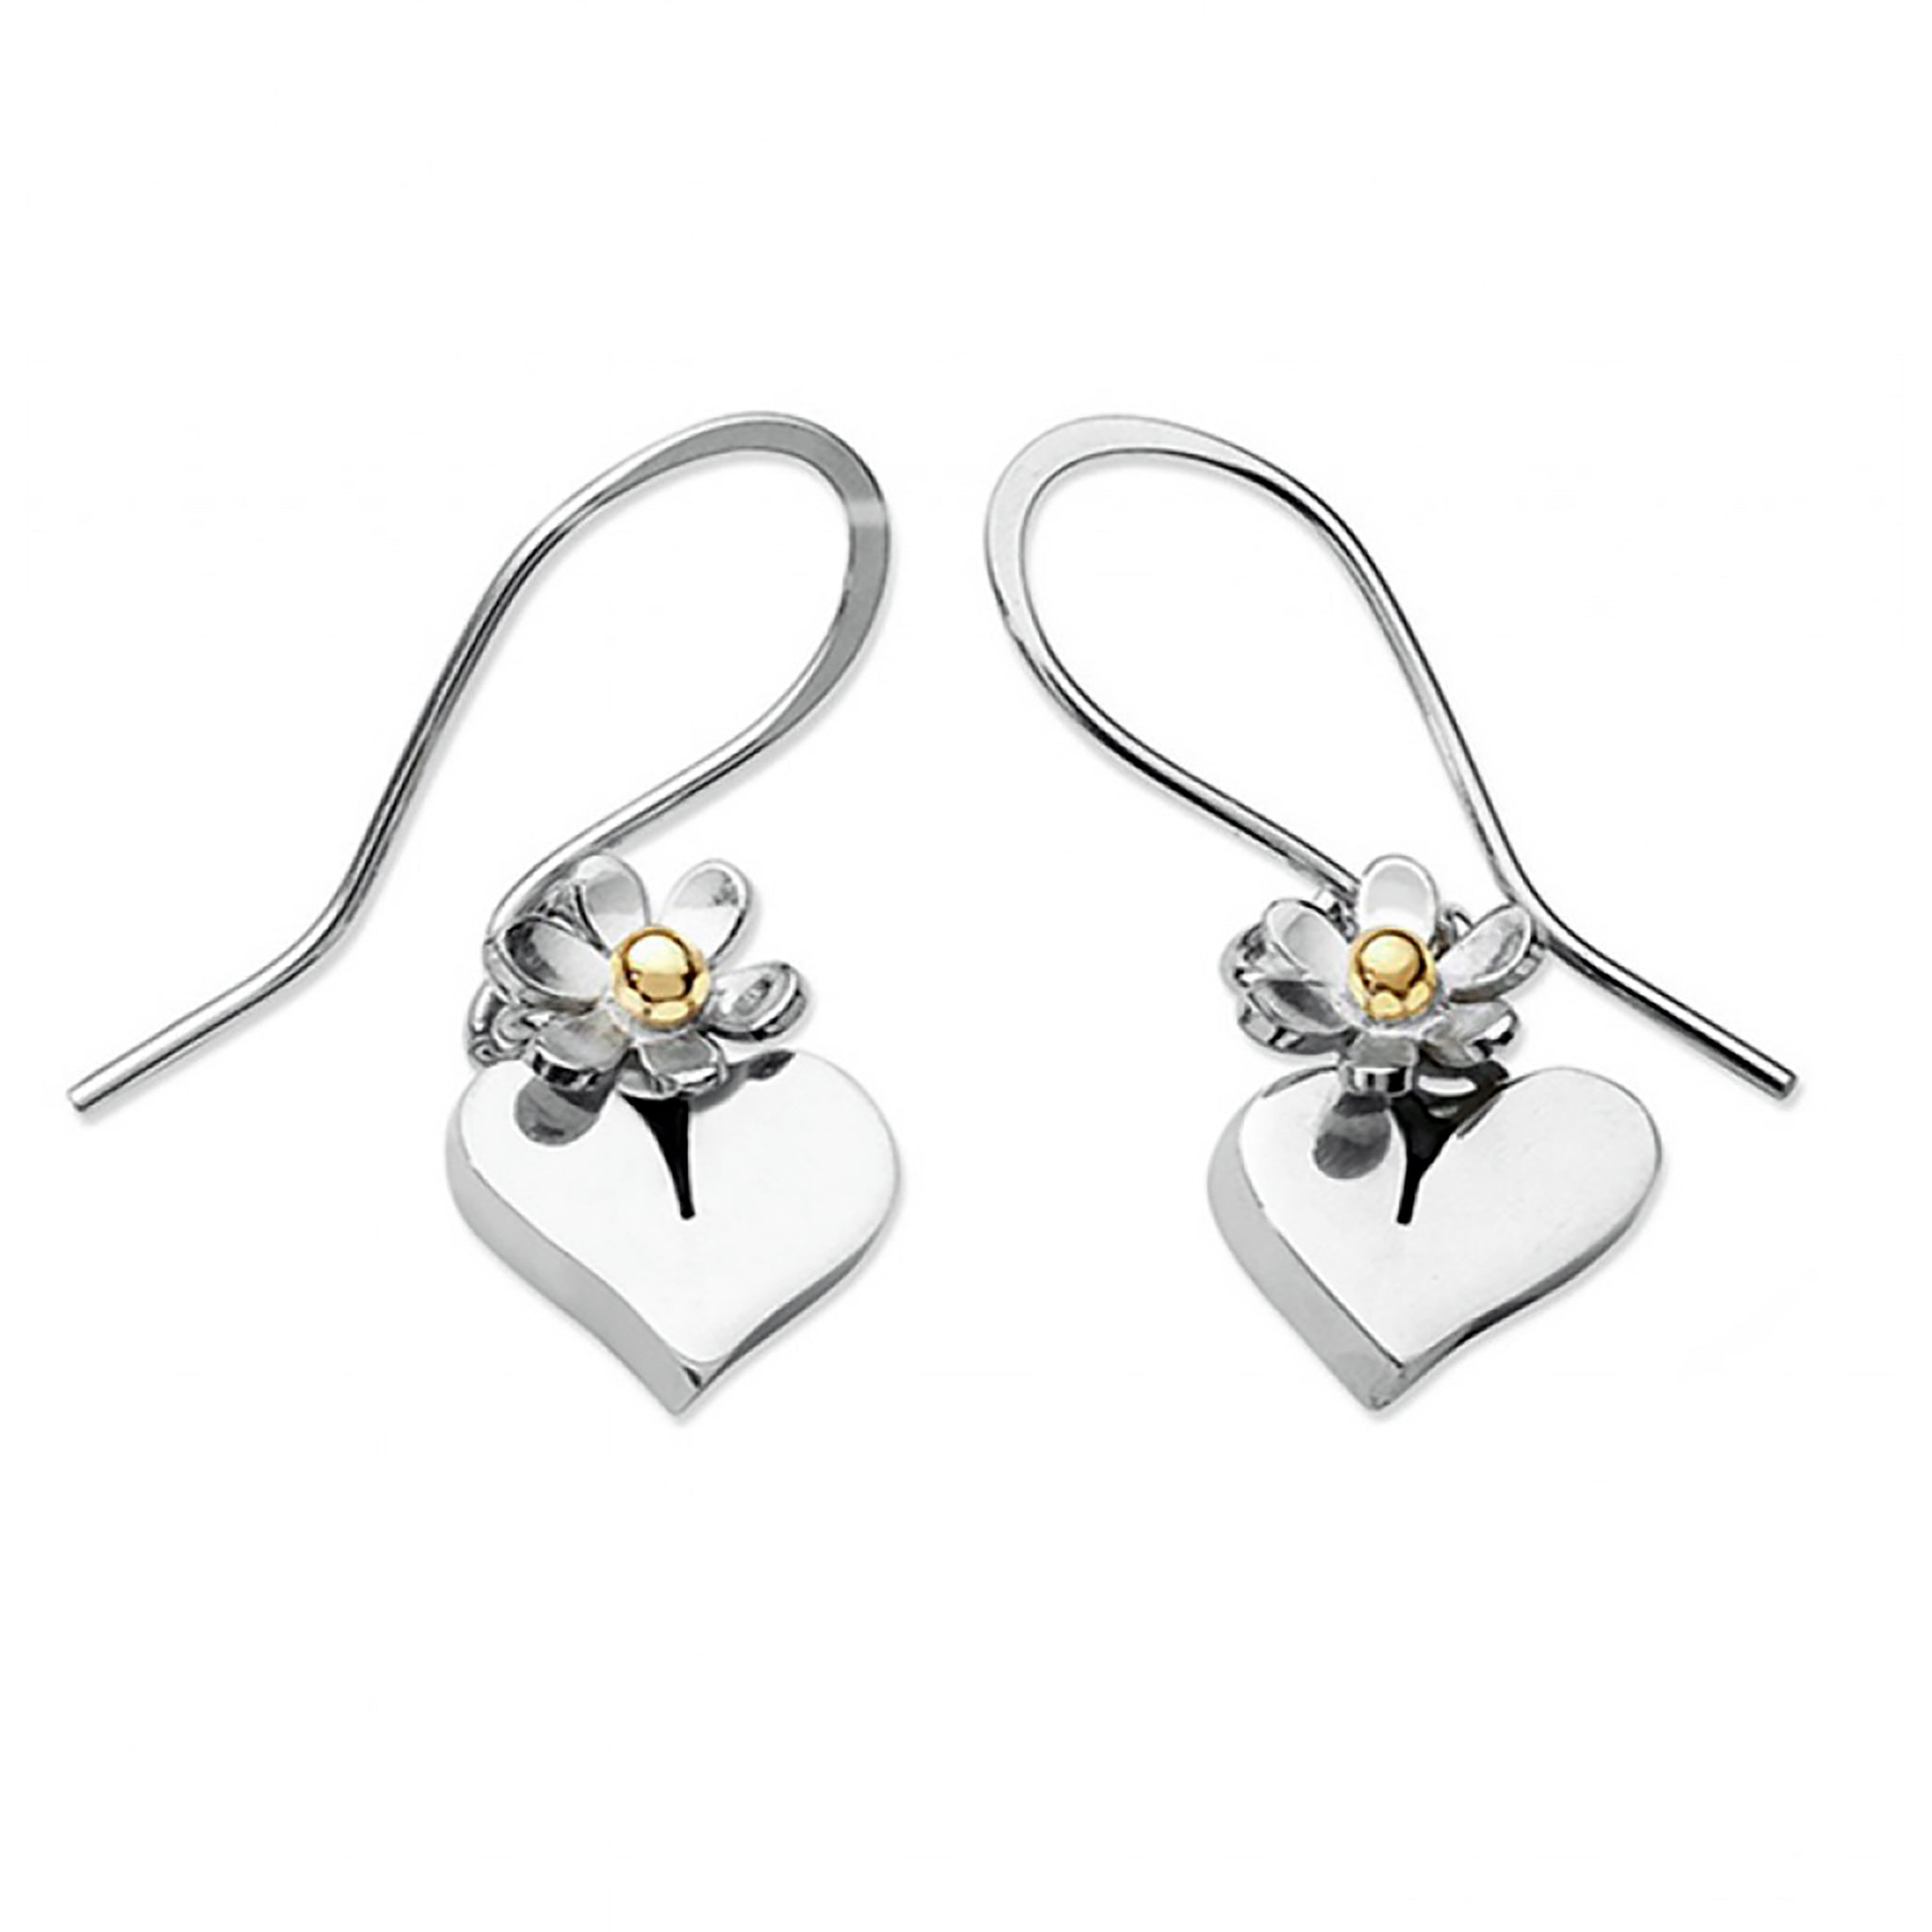 Silver earrings with heart drops and flowers with gold centres on hook fittings